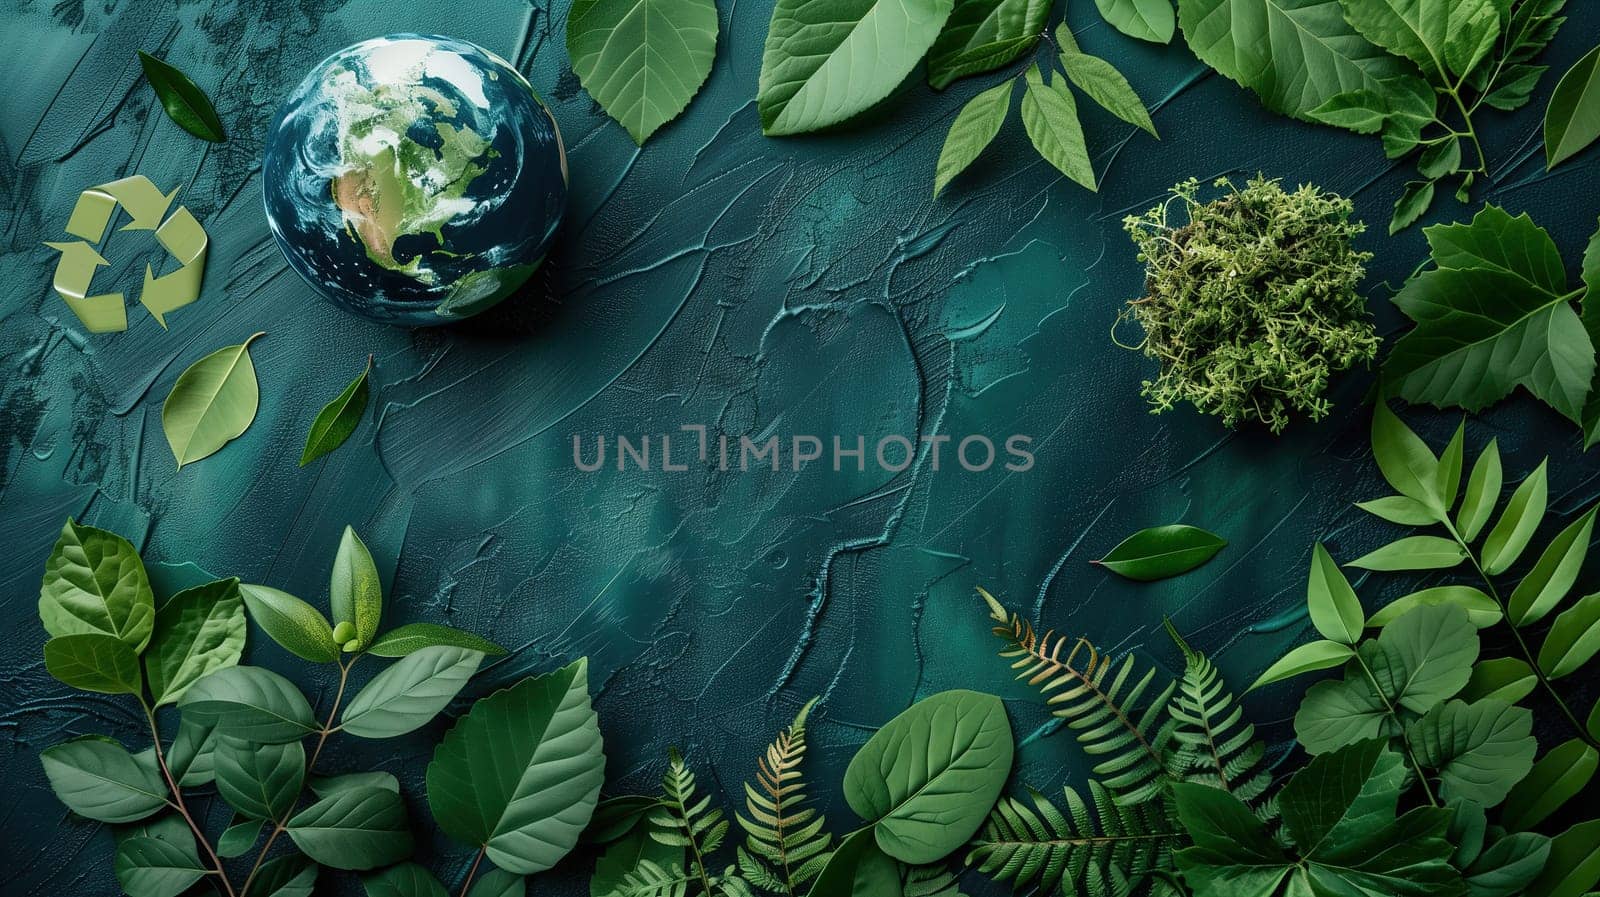 A vibrant green background filled with lush leaves, with a globe prominently placed in the center. This image symbolizes Earth Day and the importance of environmental awareness and conservation.